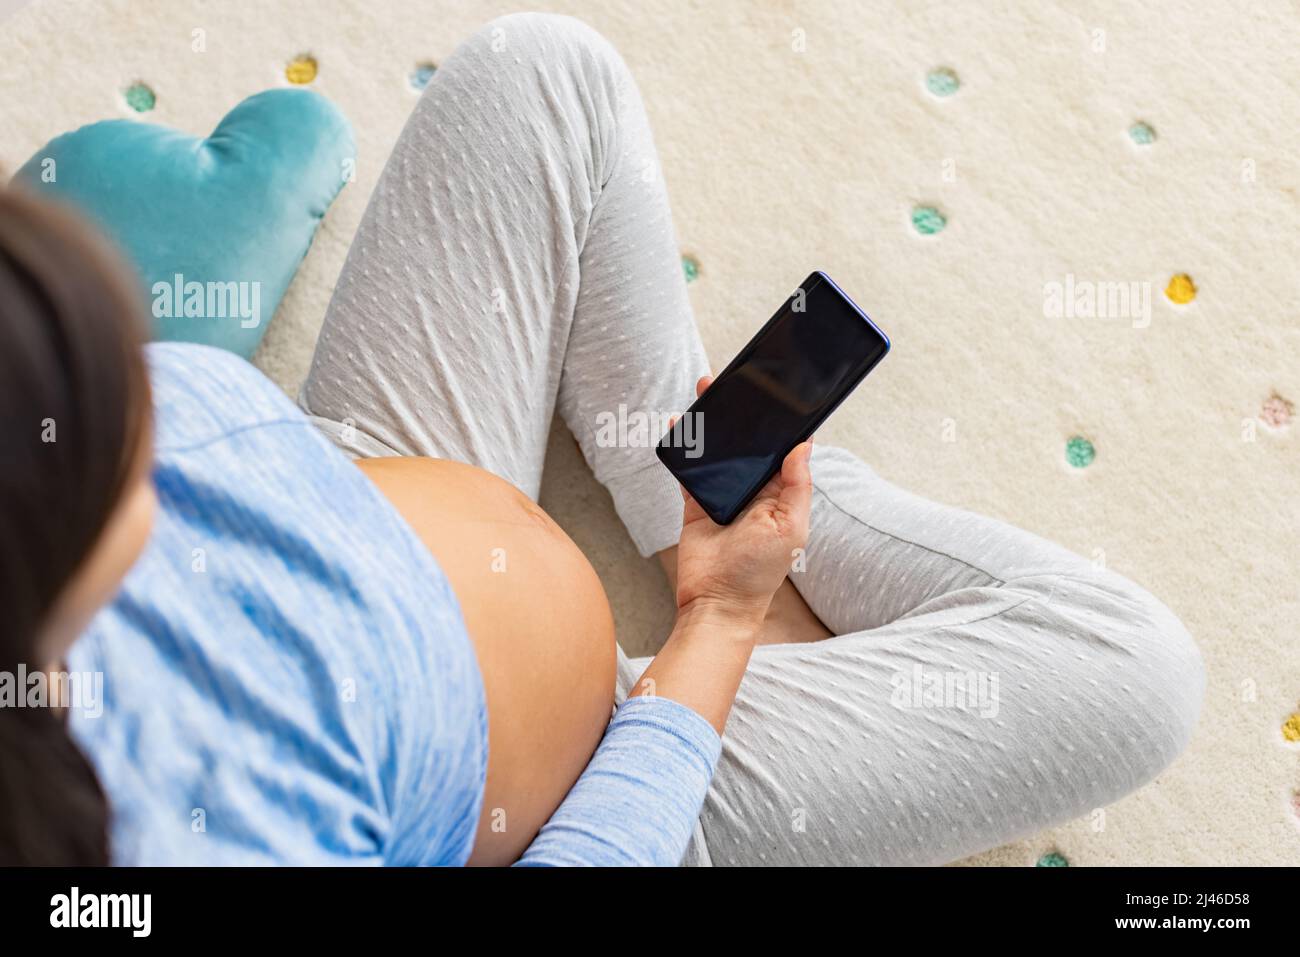 Pregnant woman using phone app for online social media or prenatal class. Top view of pregnancy bump at home Stock Photo